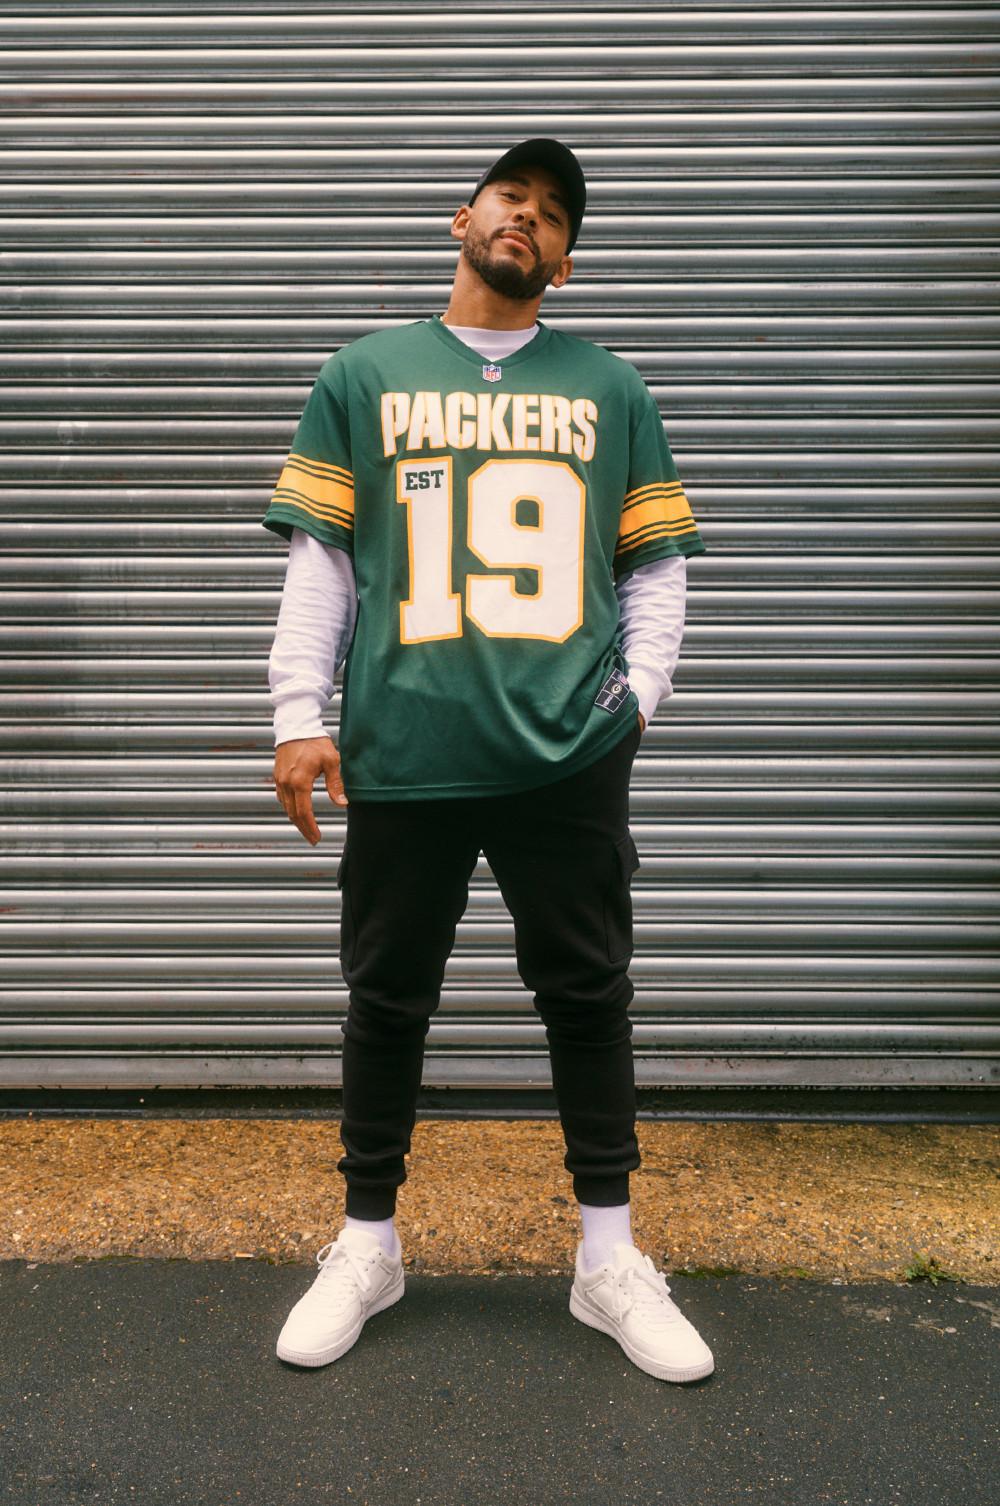 packers 19 jersey